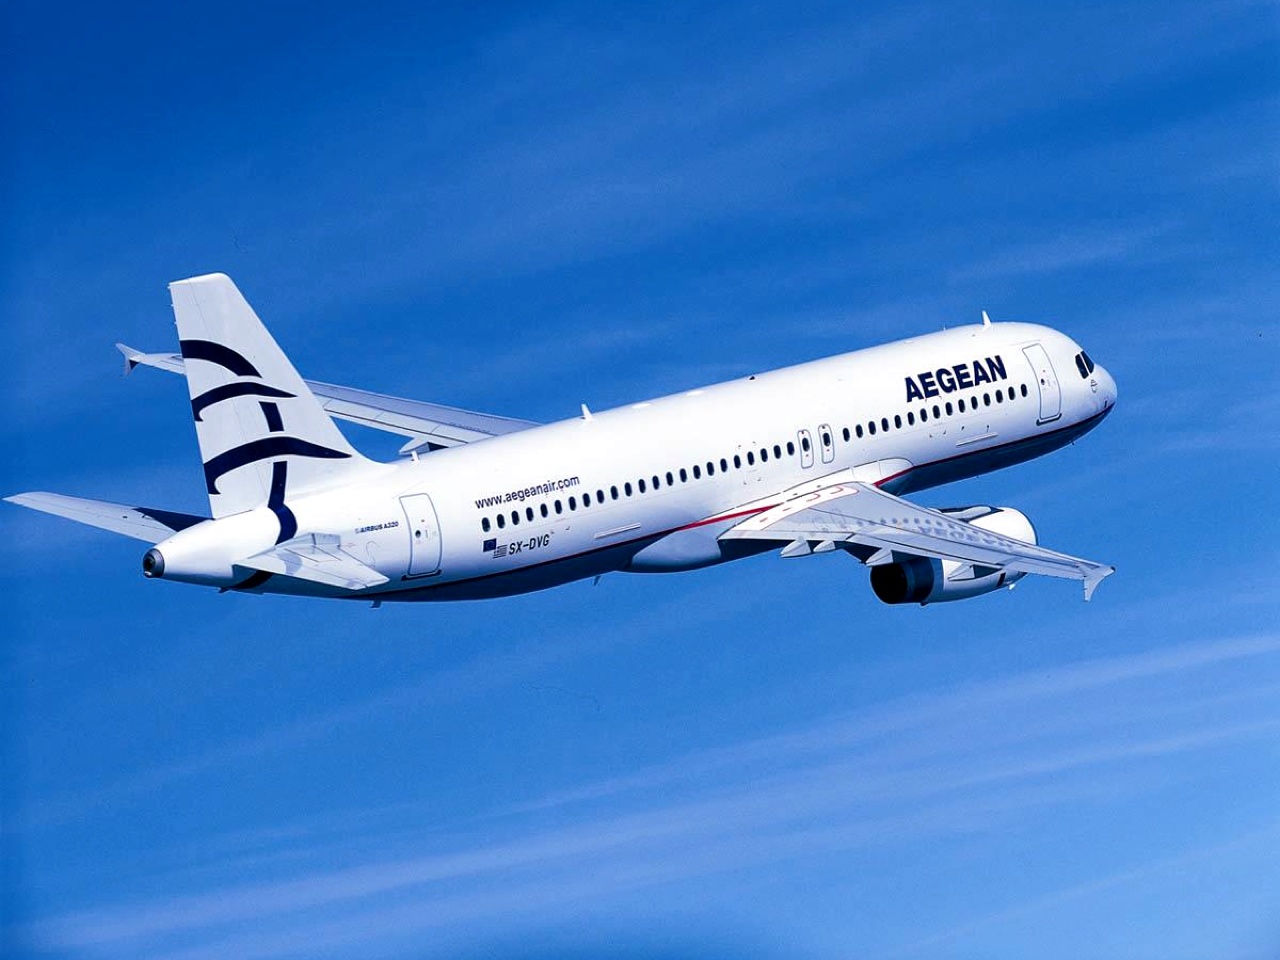 Aegean Airlines Among 2015’s Fastest Growing Airlines